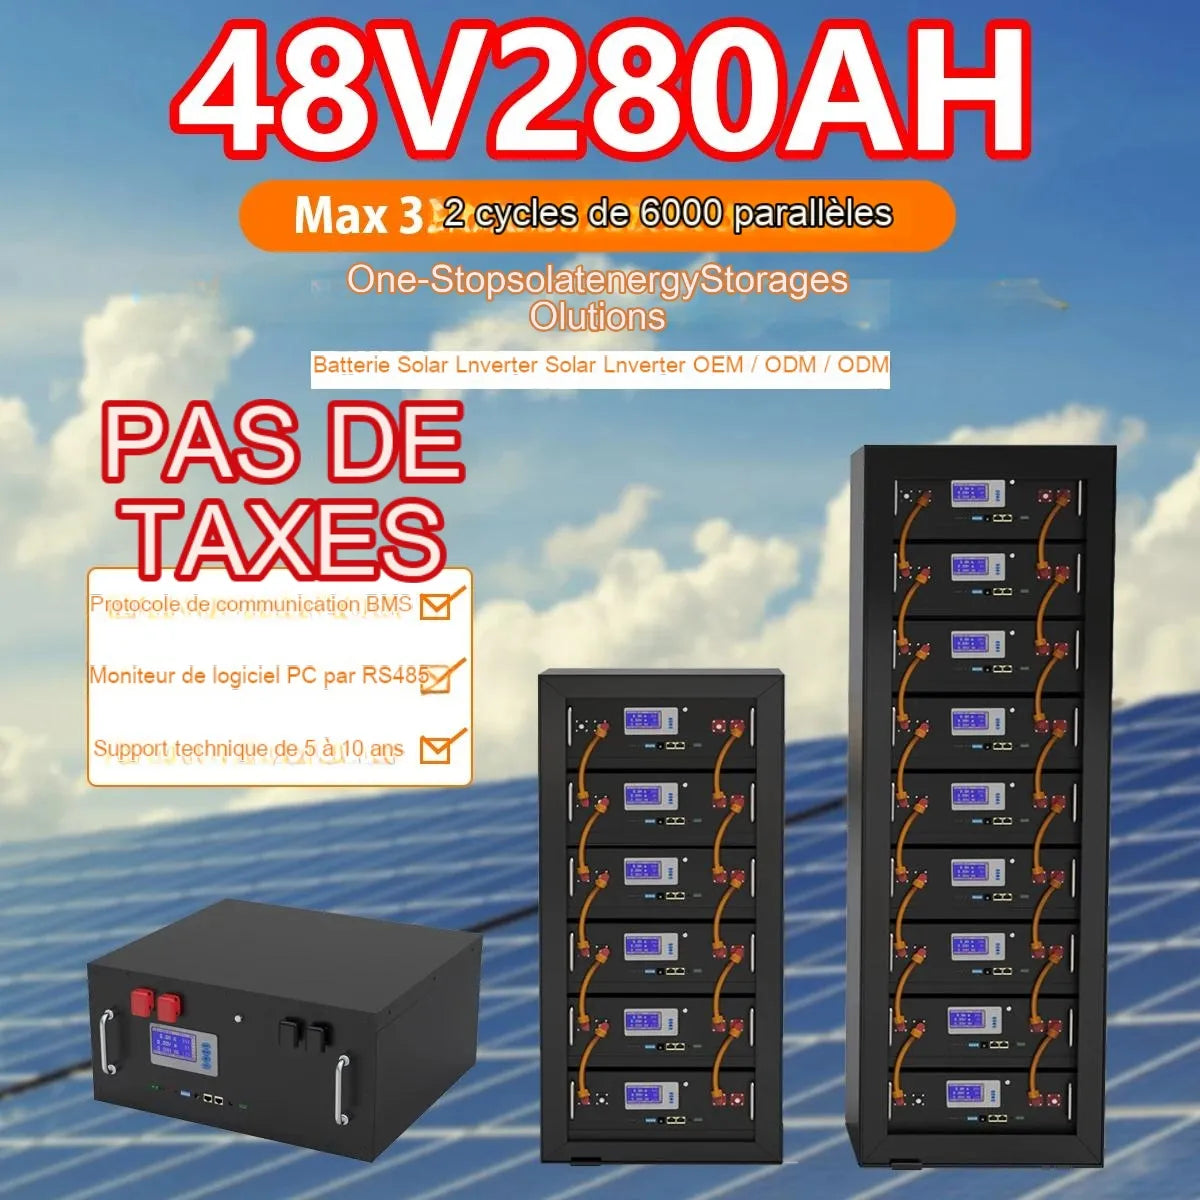 NOUVEAU 48 280AH LIFEPO4 PACK DE BATTERIE 14KWH - 6000+ CYLCLES 16S 51.2V 200AH 300AH RS485 / CAN OFF / ON GRID SOLYS SYSTEM 10 YEARS GARANY